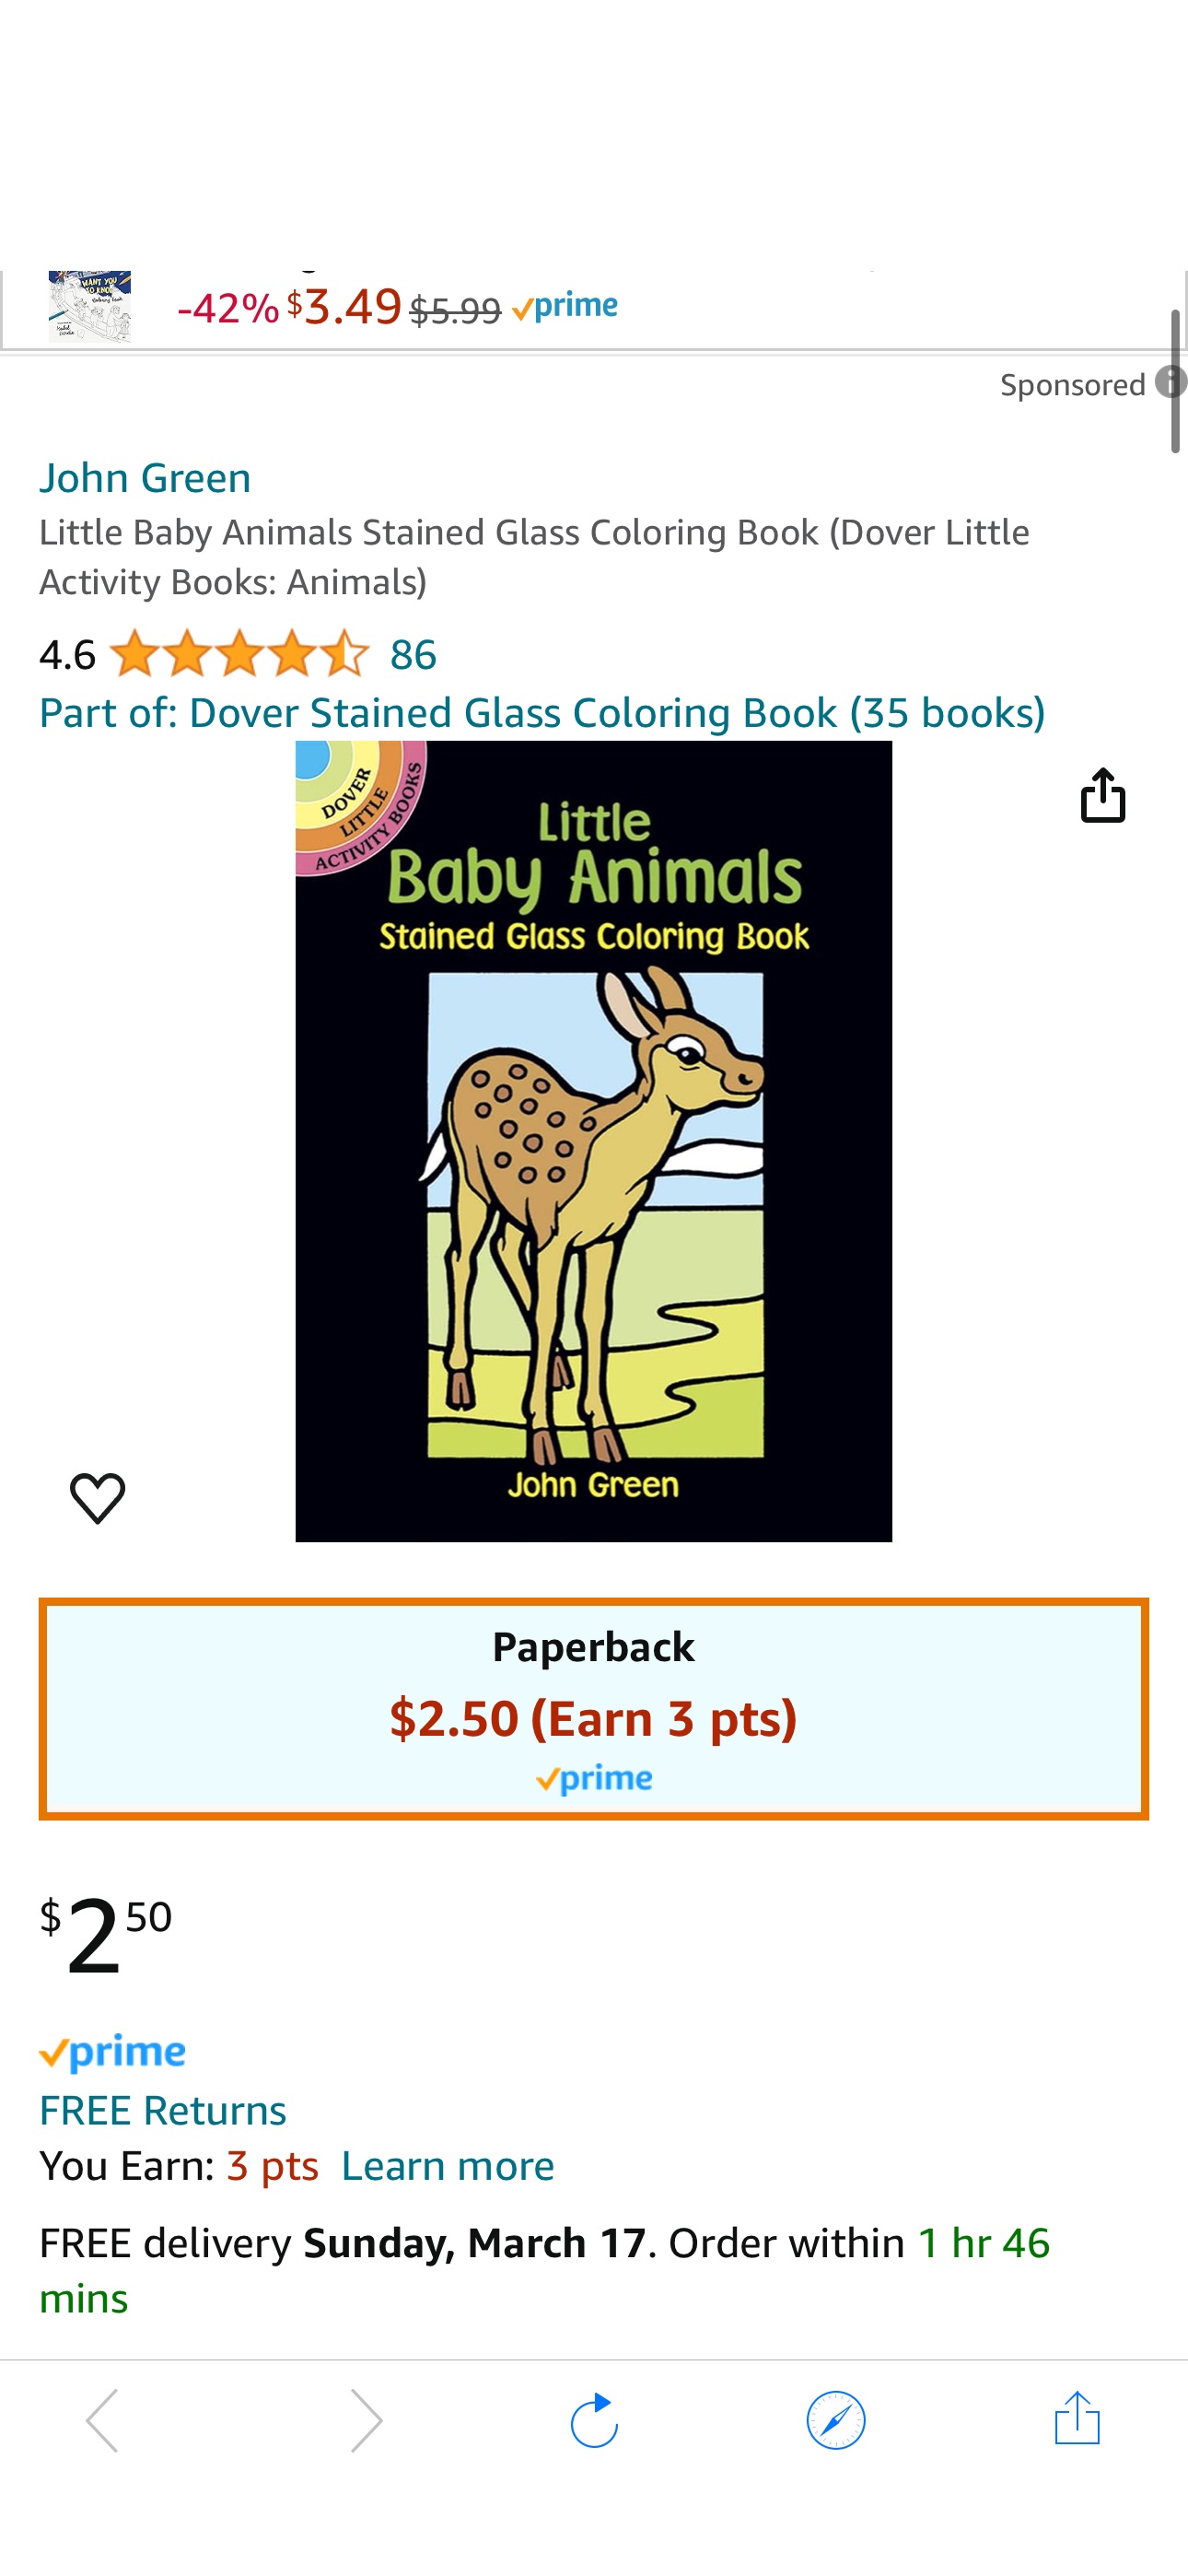 Little Baby Animals Stained Glass Coloring Book (Dover Little Activity Books: Animals): Green, John: 9780486272221: Amazon.com: Books